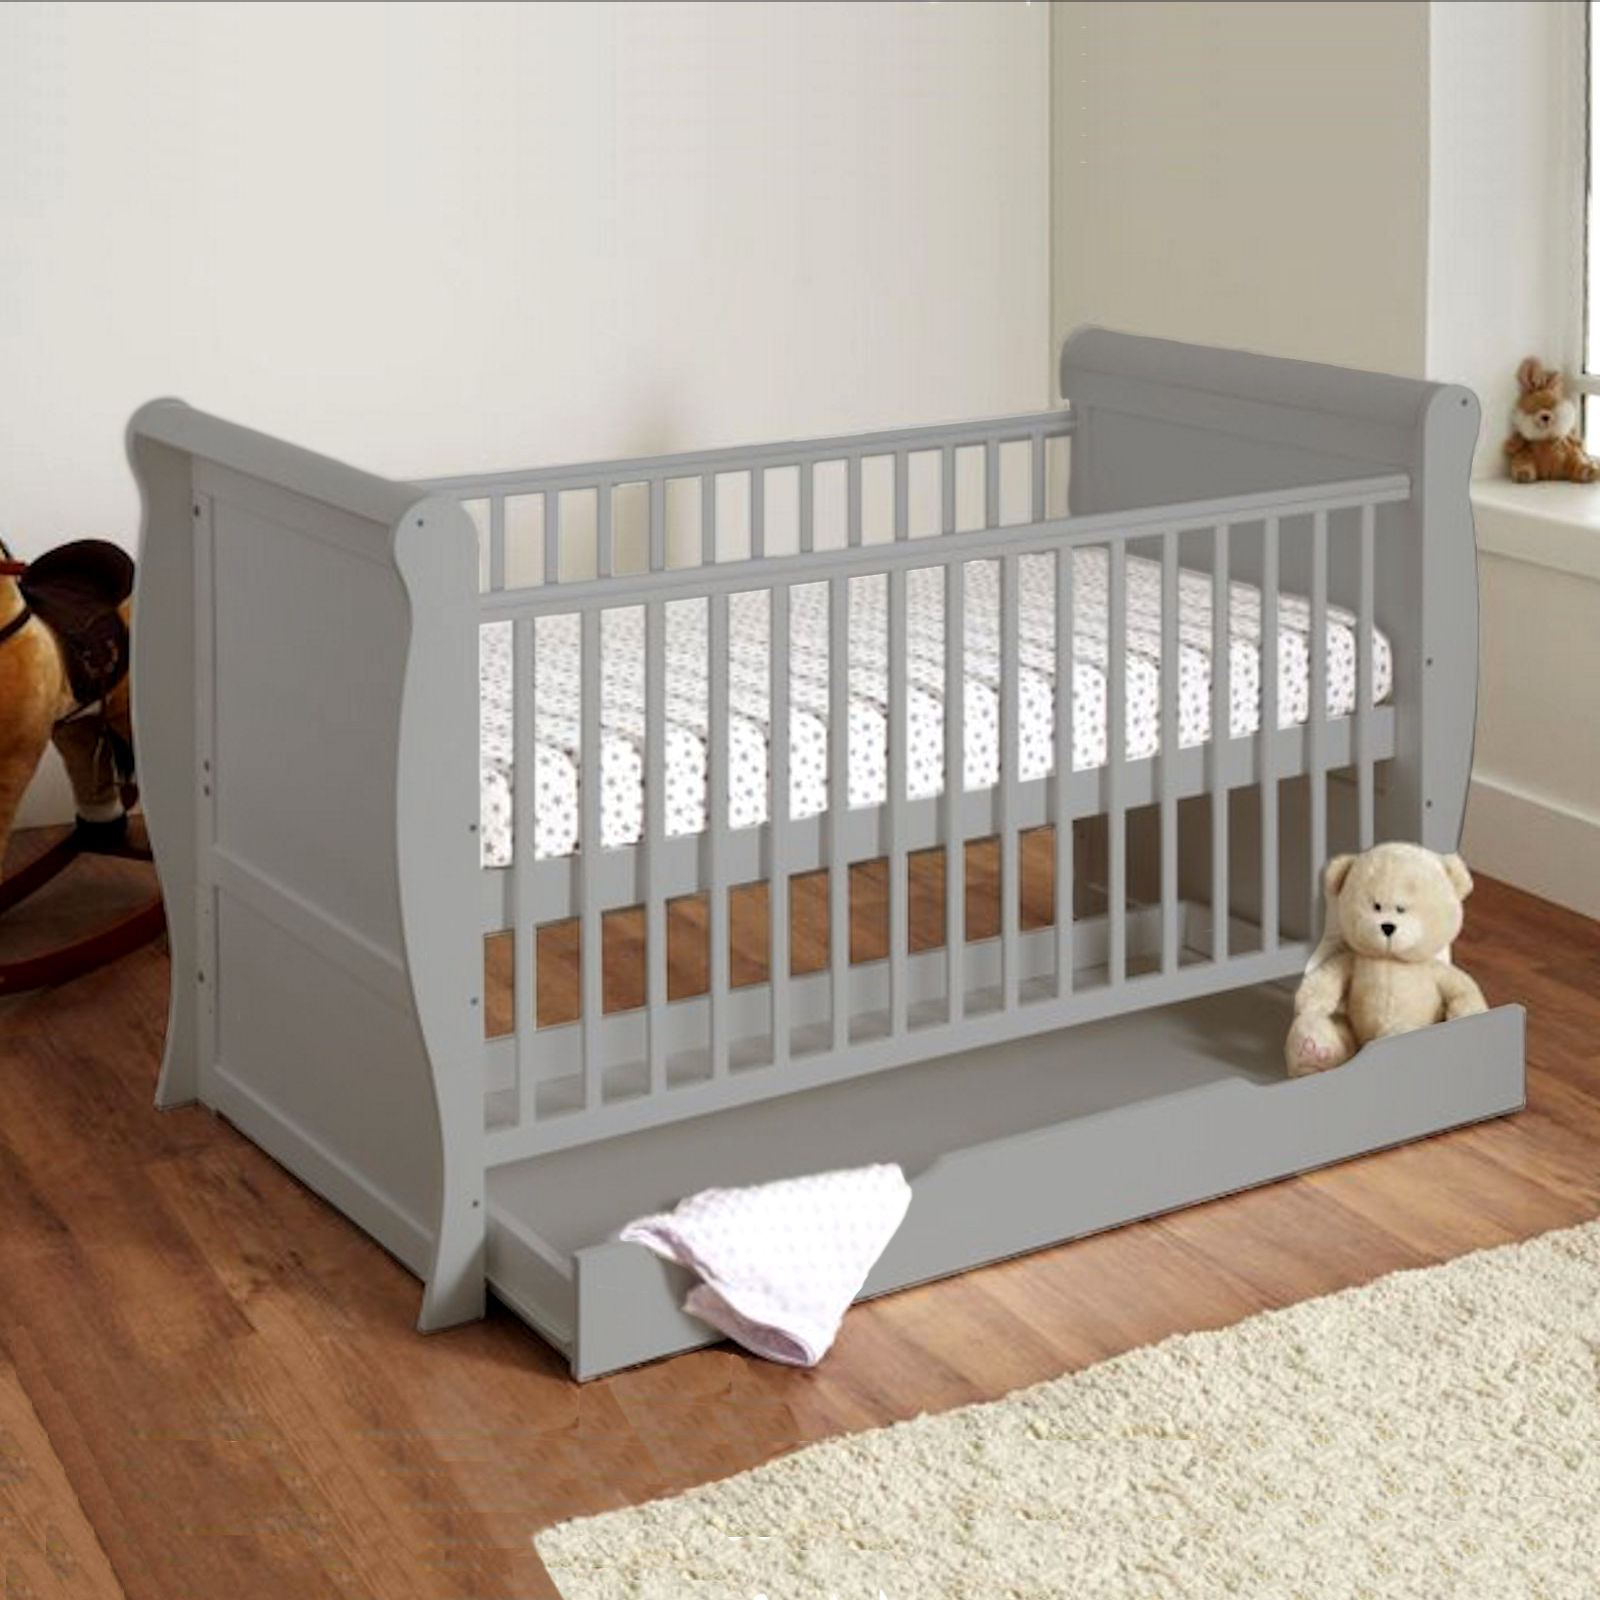 4Baby 3 in 1 Sleigh Cot Bed - Grey